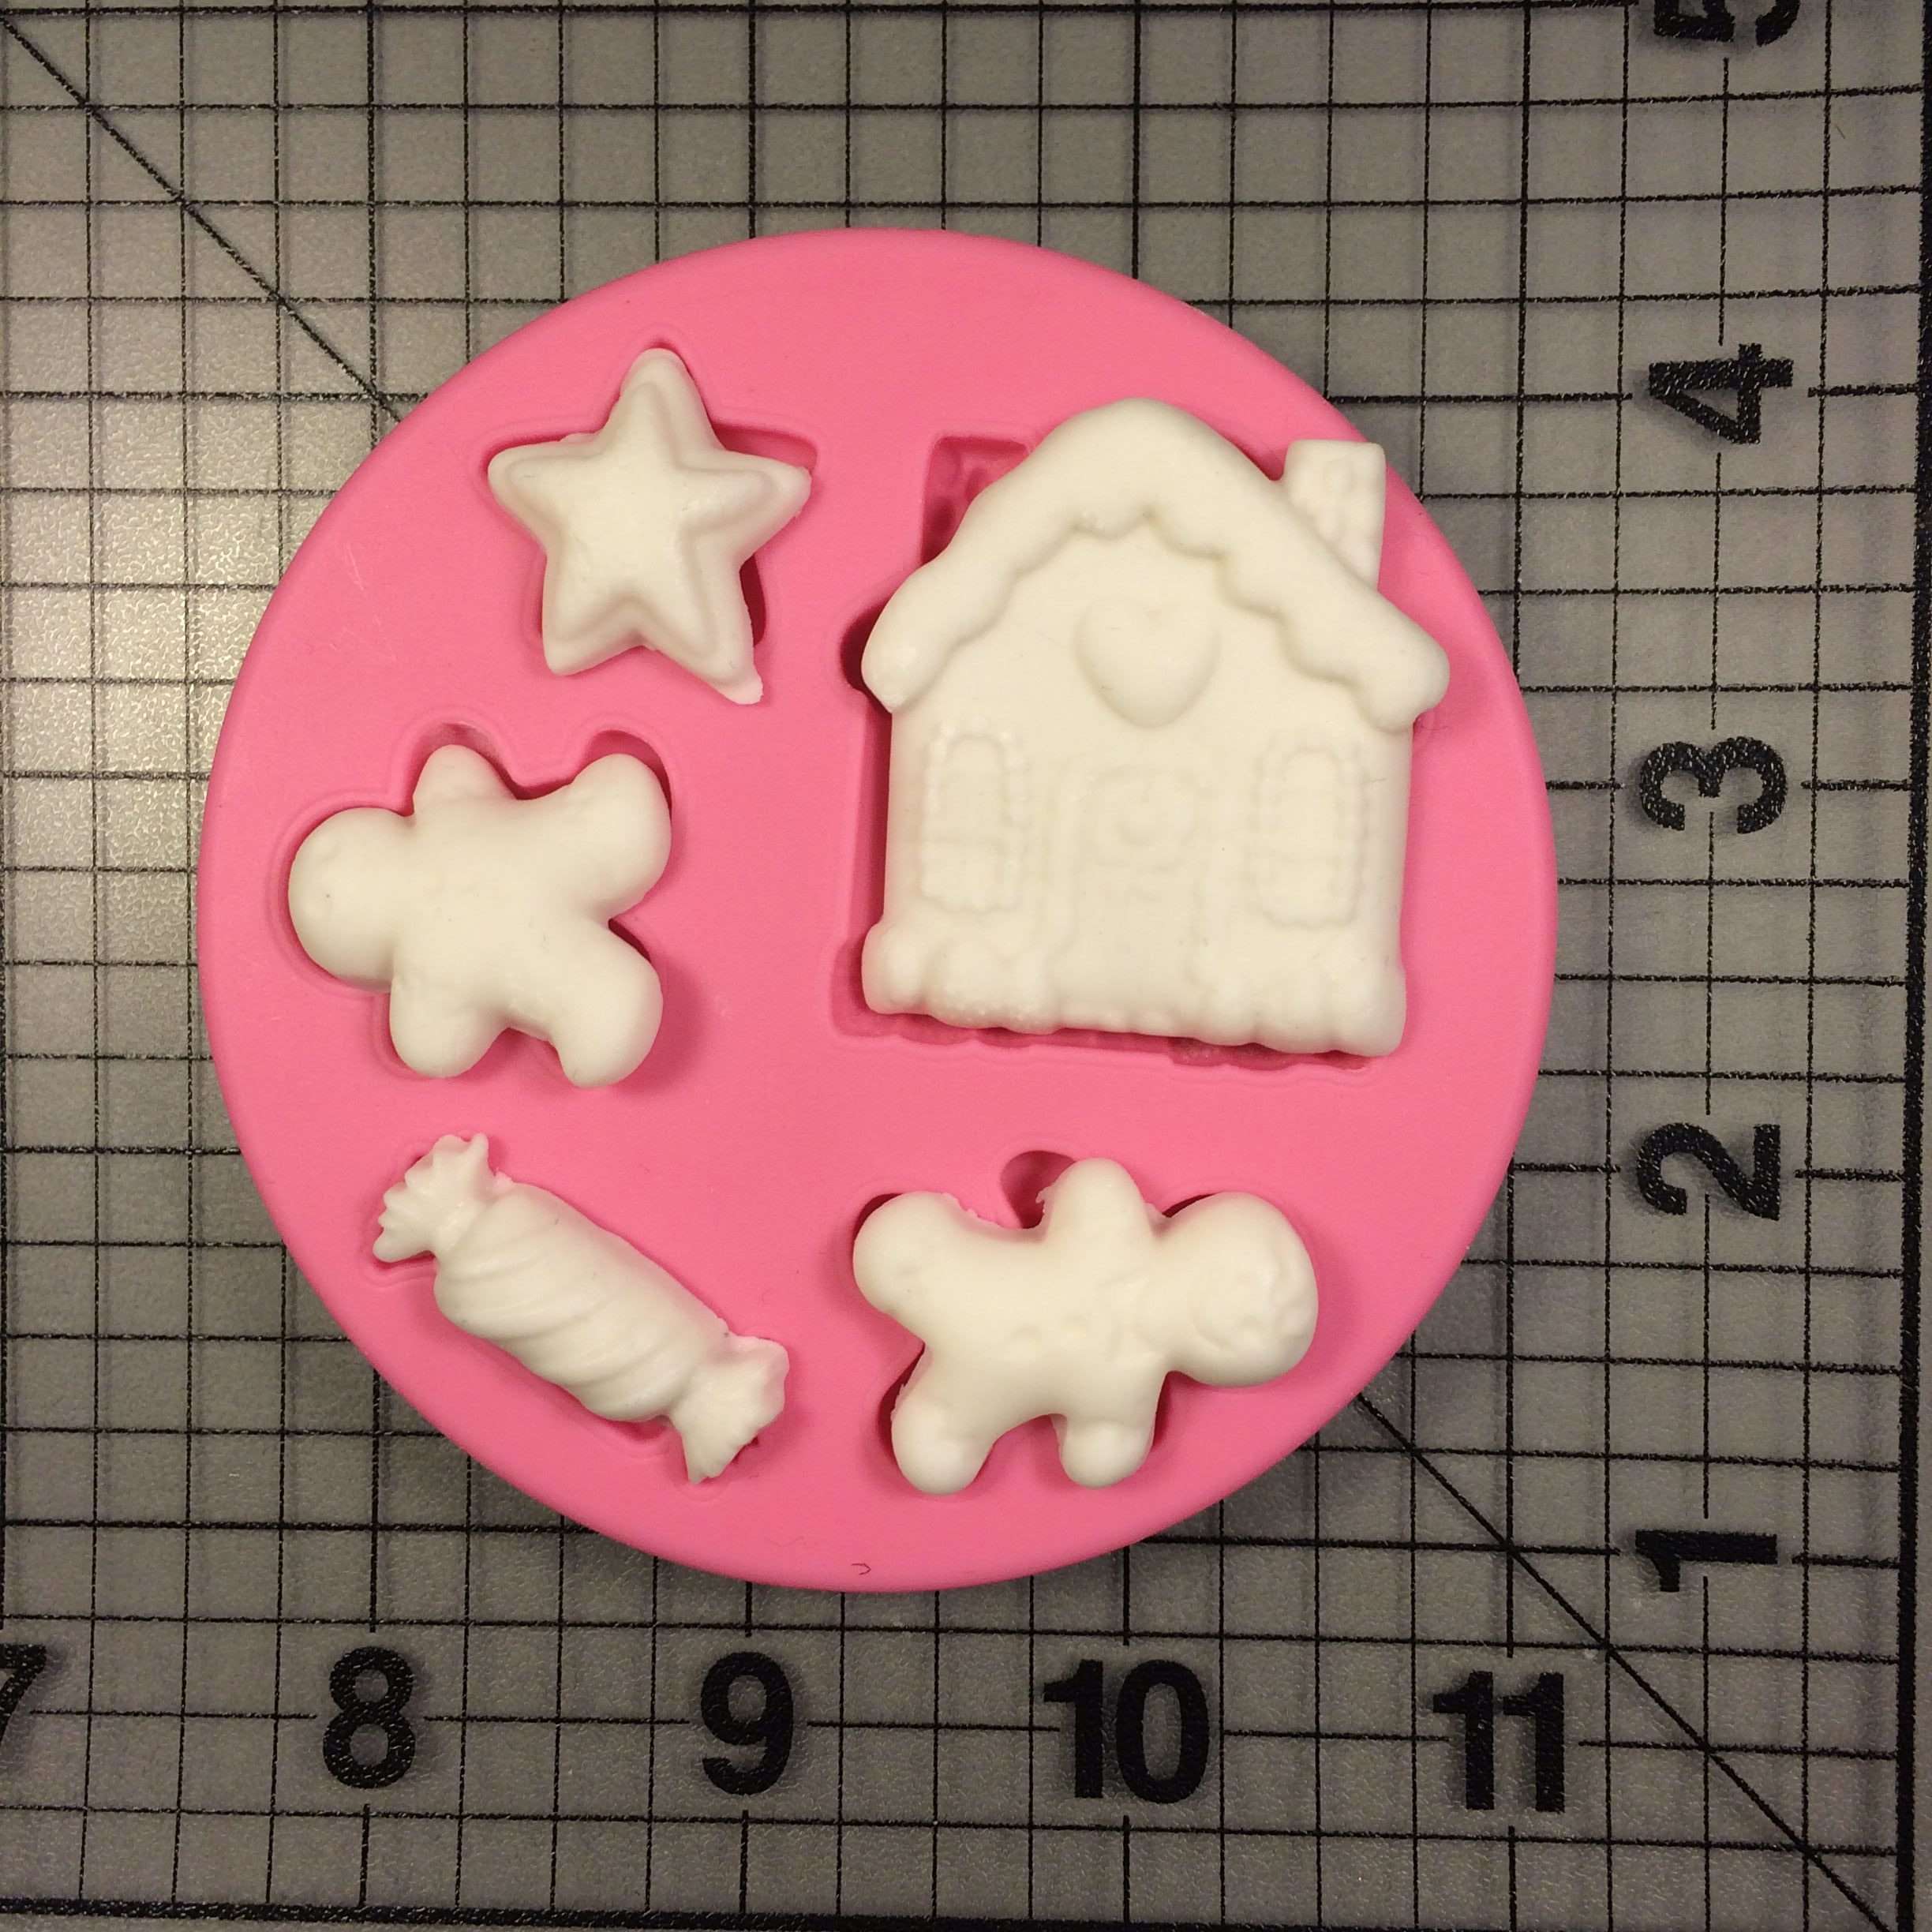 https://www.jbcookiecutters.com/wp-content/uploads/2016/09/Christmas-Cookies-026-Silicone-Mold-2-e1473188532393.jpg